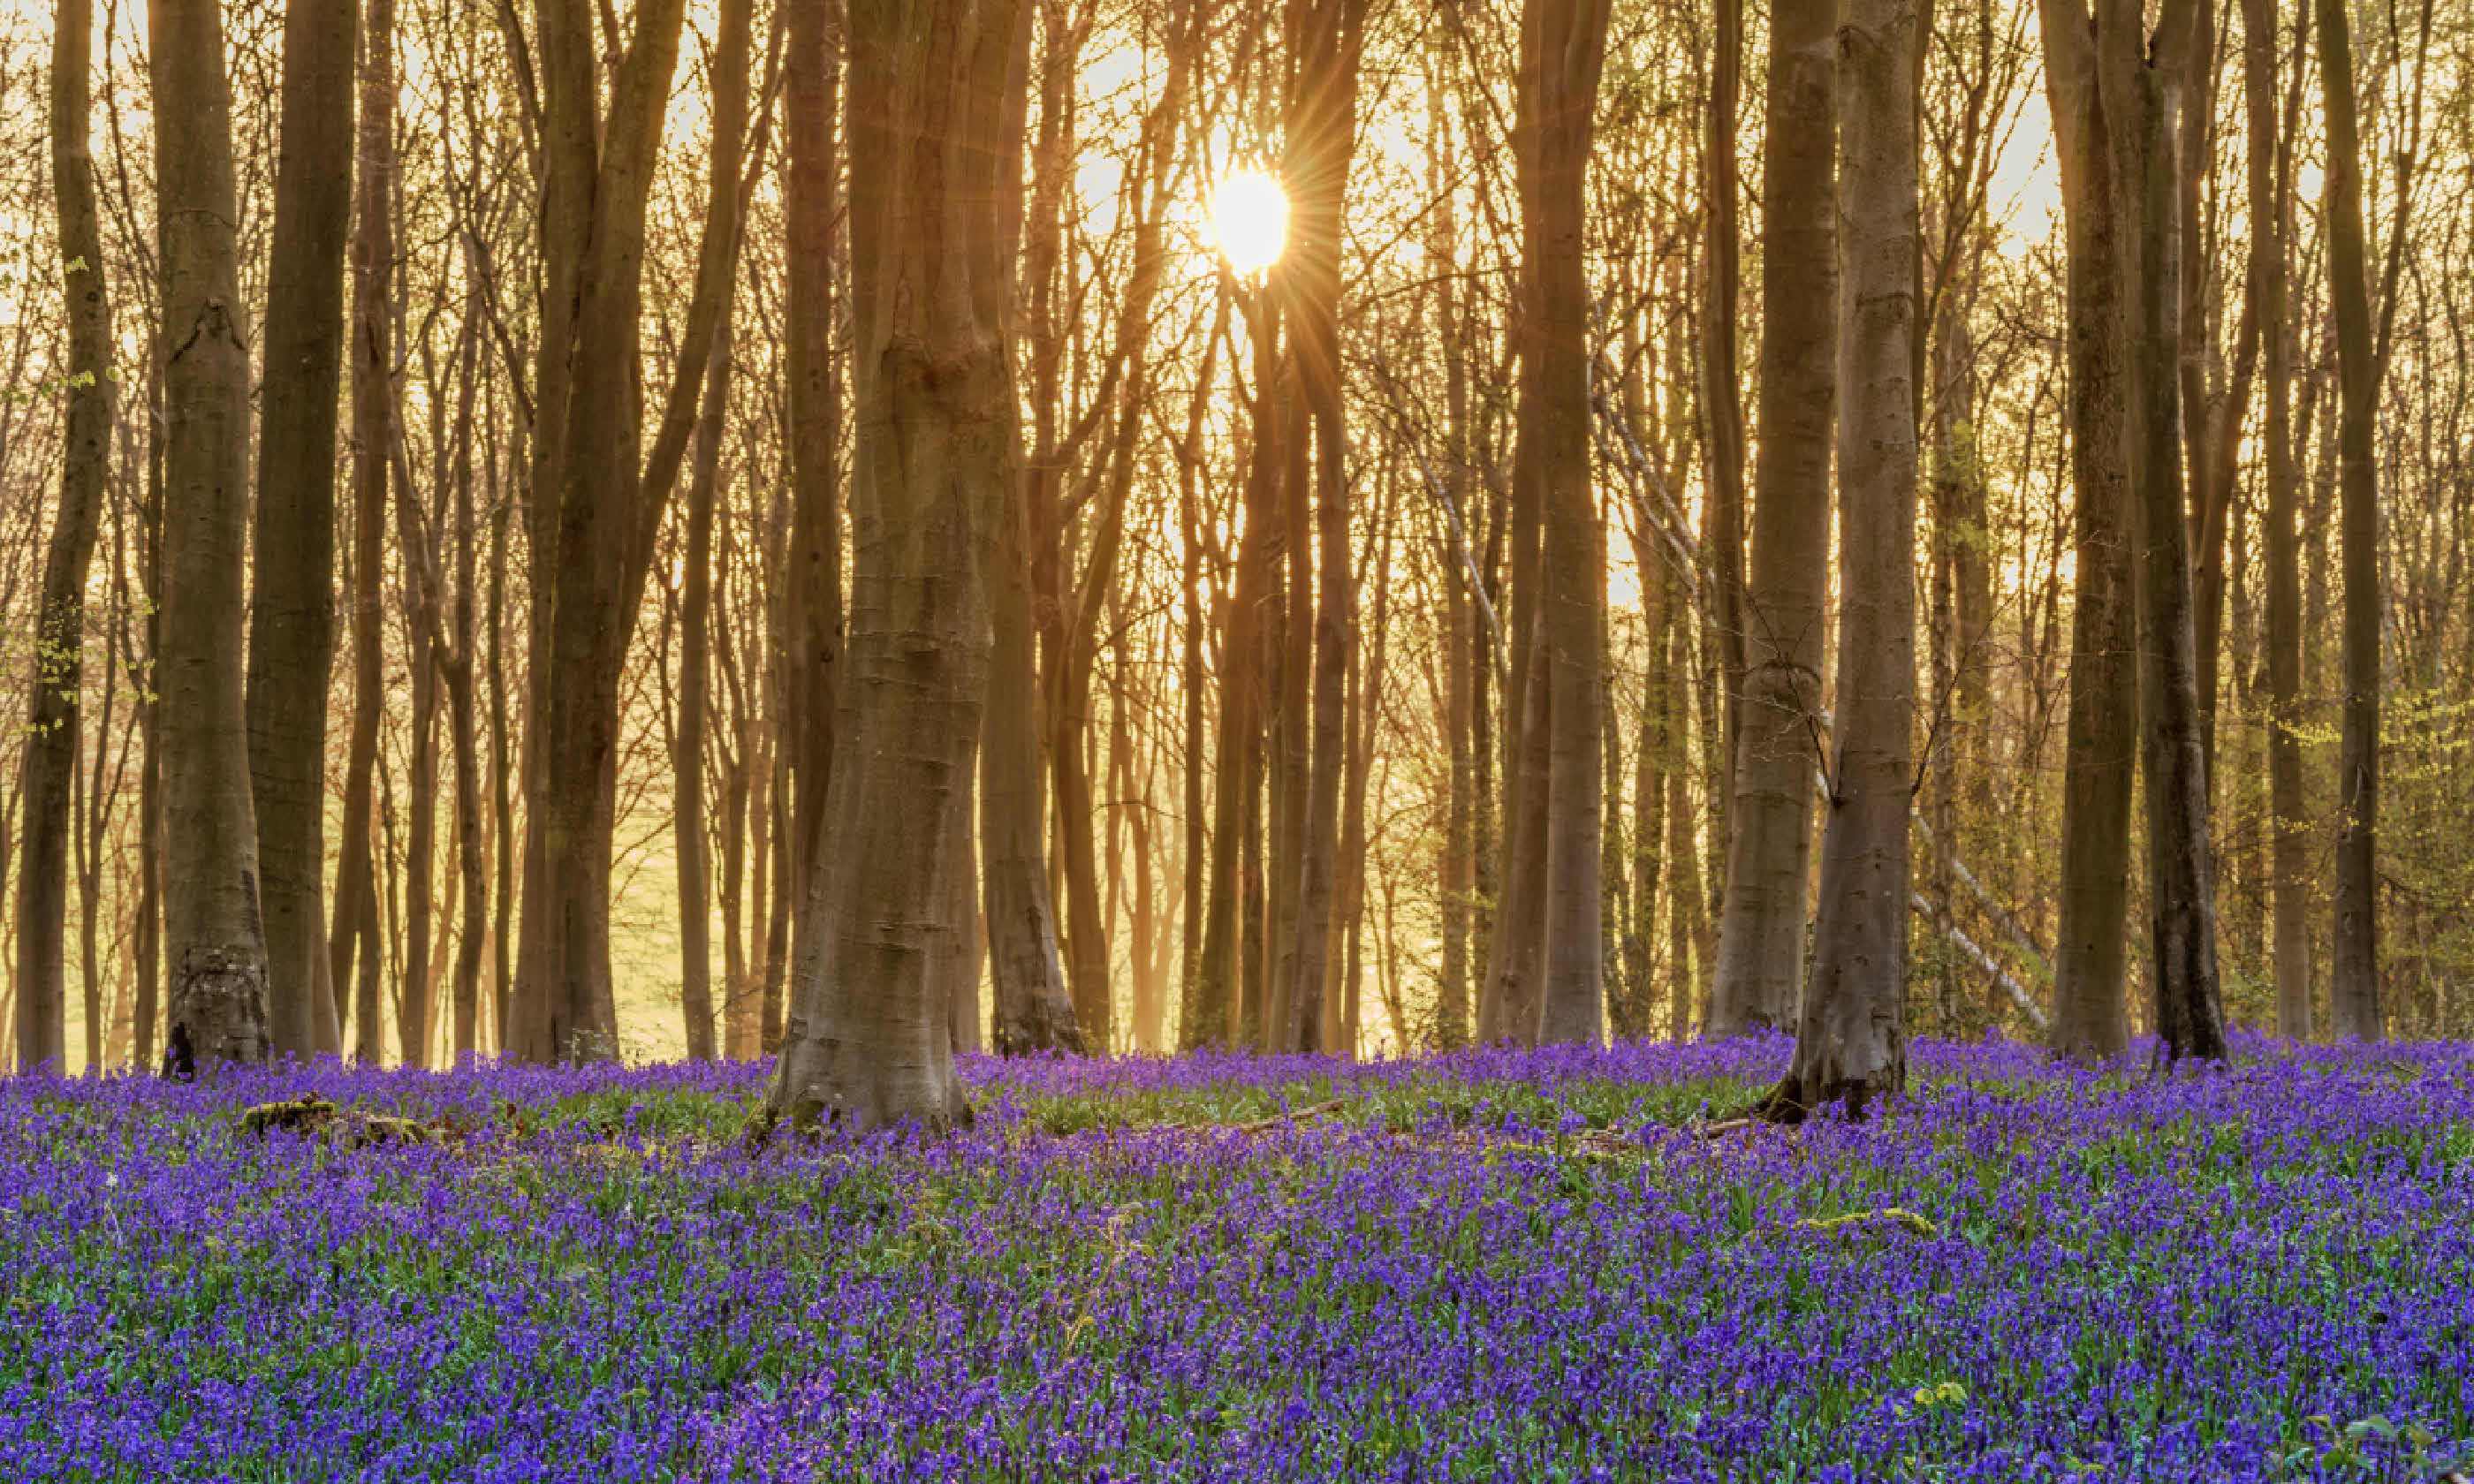 Bluebells in Hampshire, England (Shutterstock)